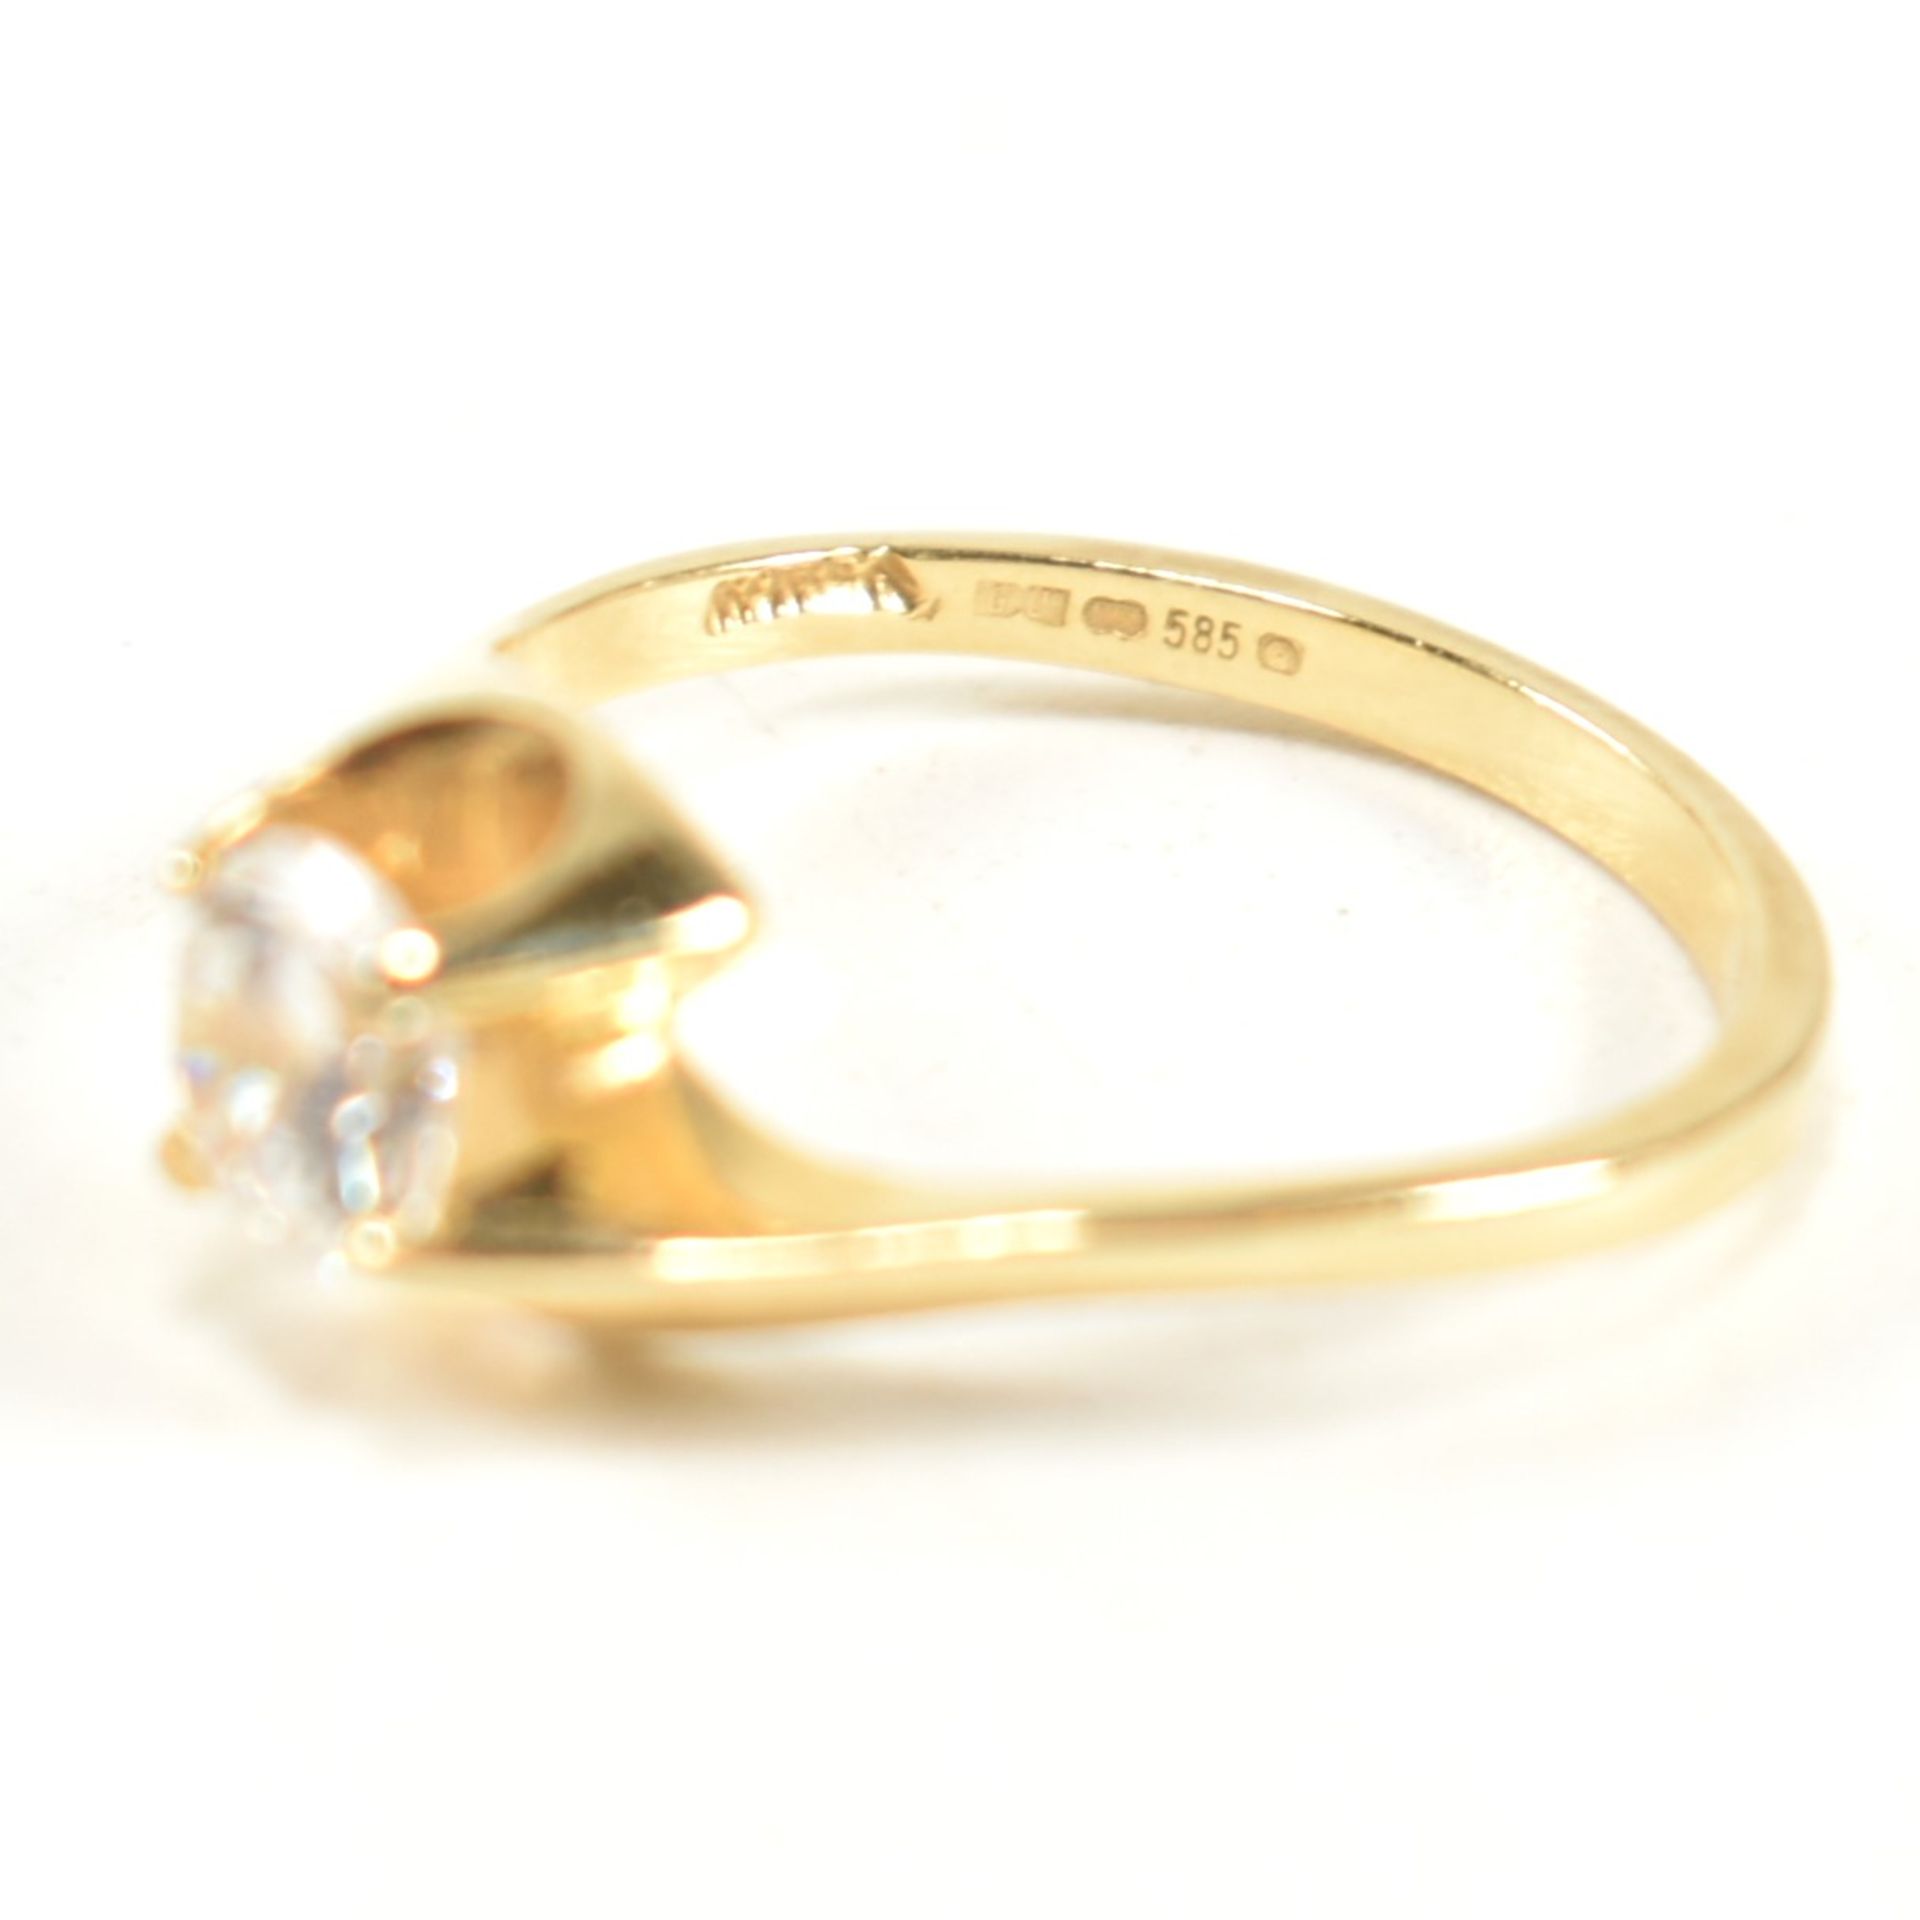 HALLMARKED 14CT GOLD & CZ CROSSOVER RING - Image 8 of 9